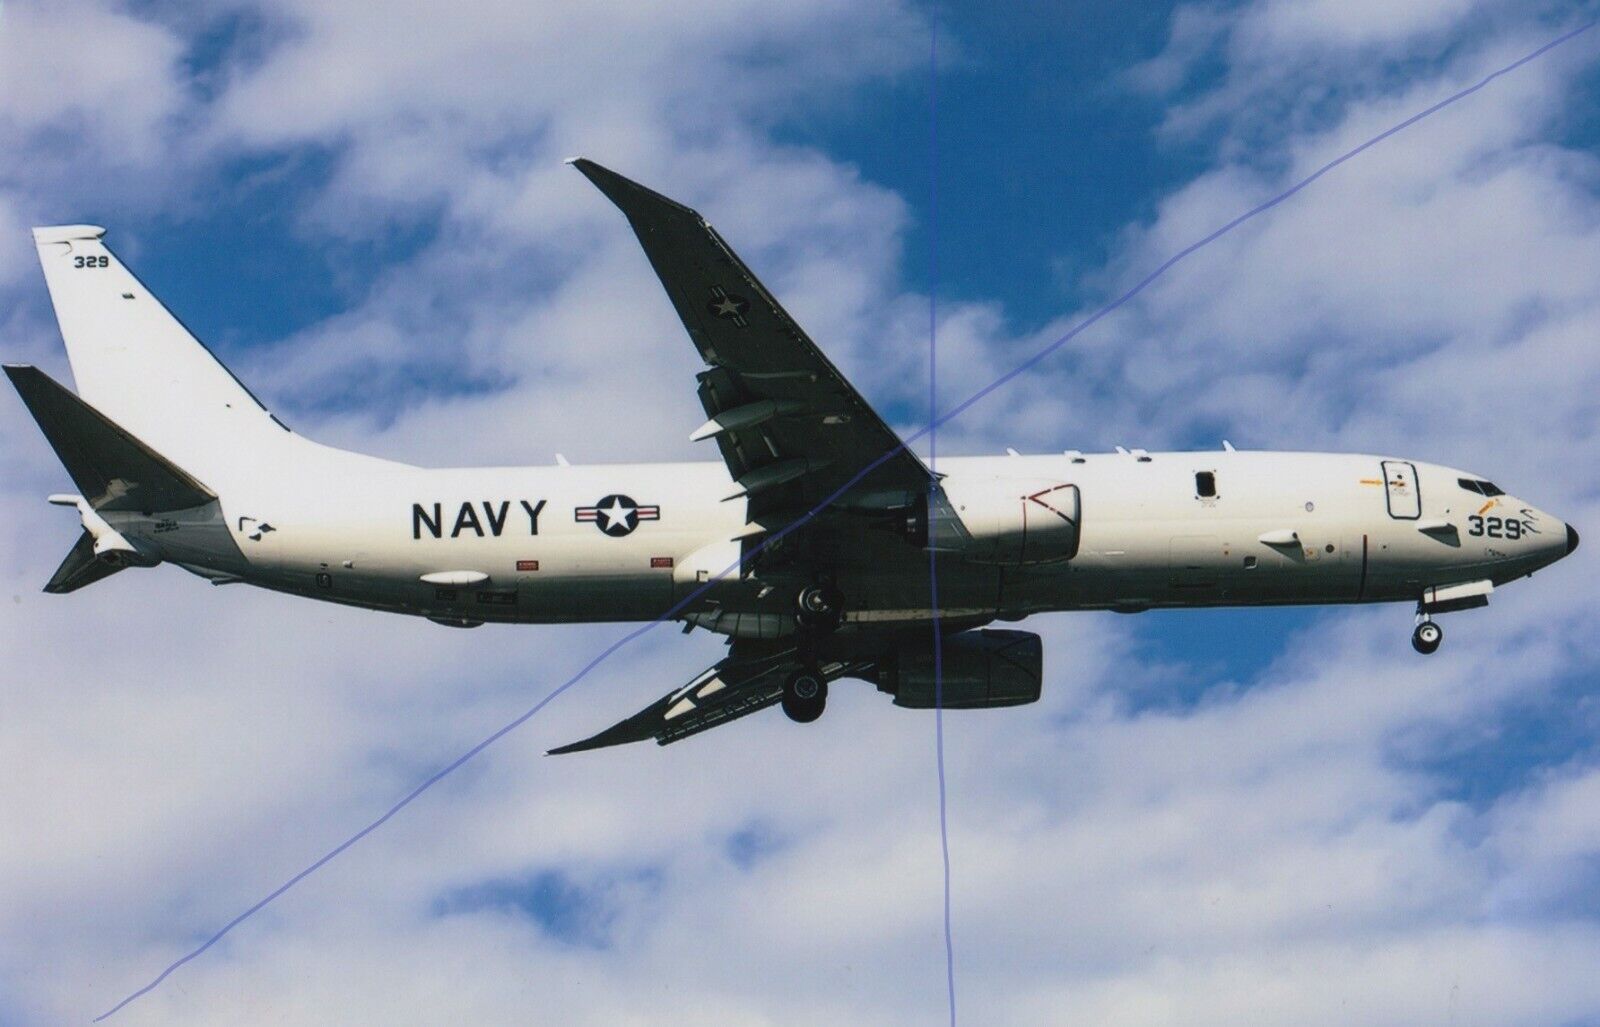 MILITARY AIRCRAFT PLANE PHOTO US NAVY PHOTOGRAPH OF 329 ON PICTURE OF A BOEING.